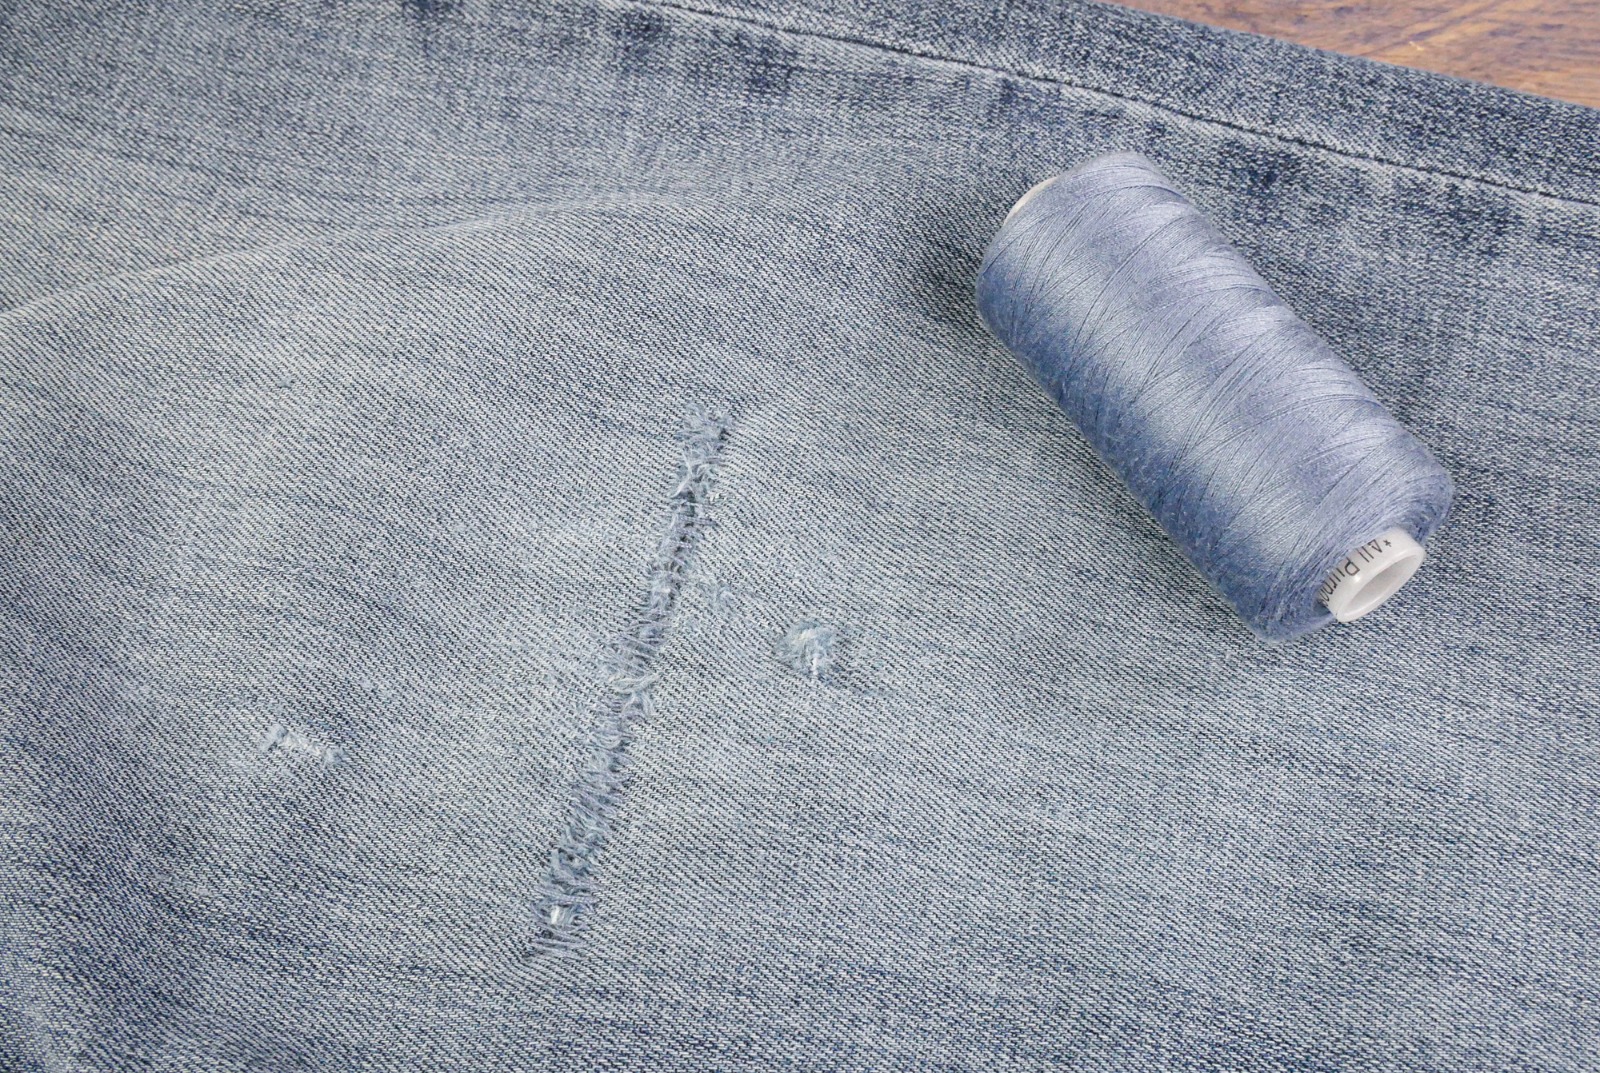 A photo of a hole in a pair of denim jeans repaired using hand sewing.